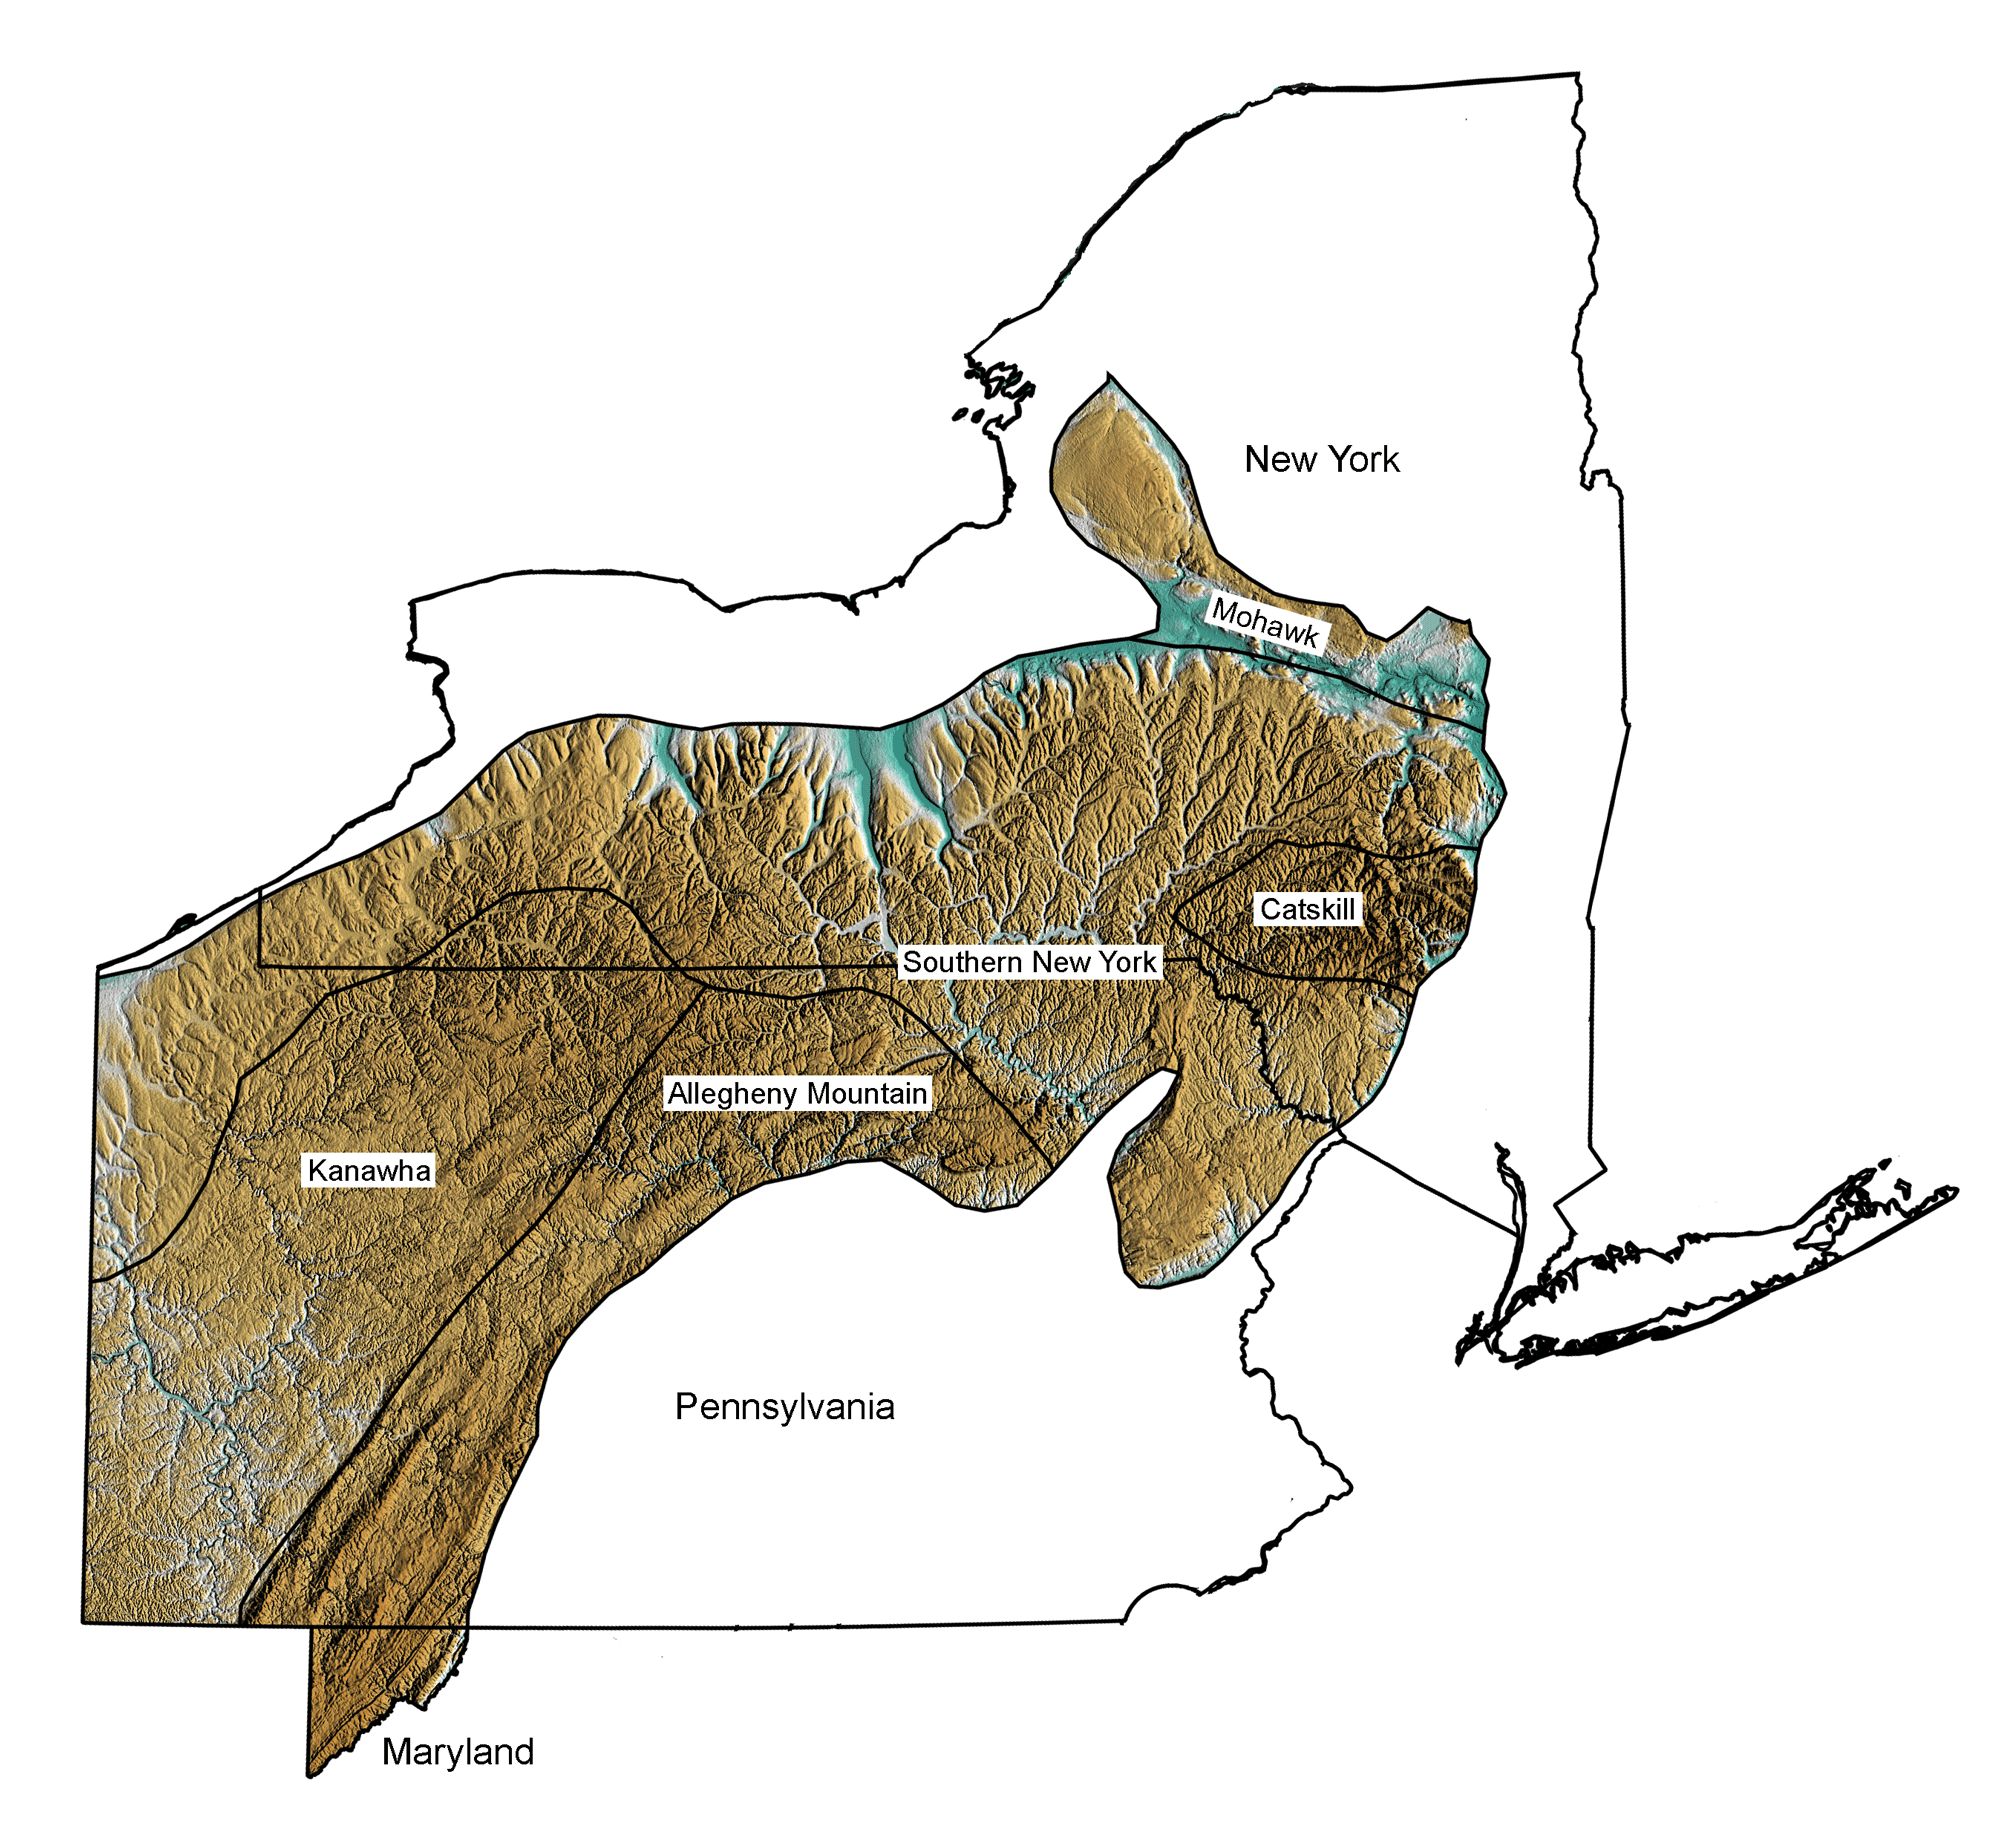 Topographic map showing the physiographic subdivisions of teh Allegheny Plateau.